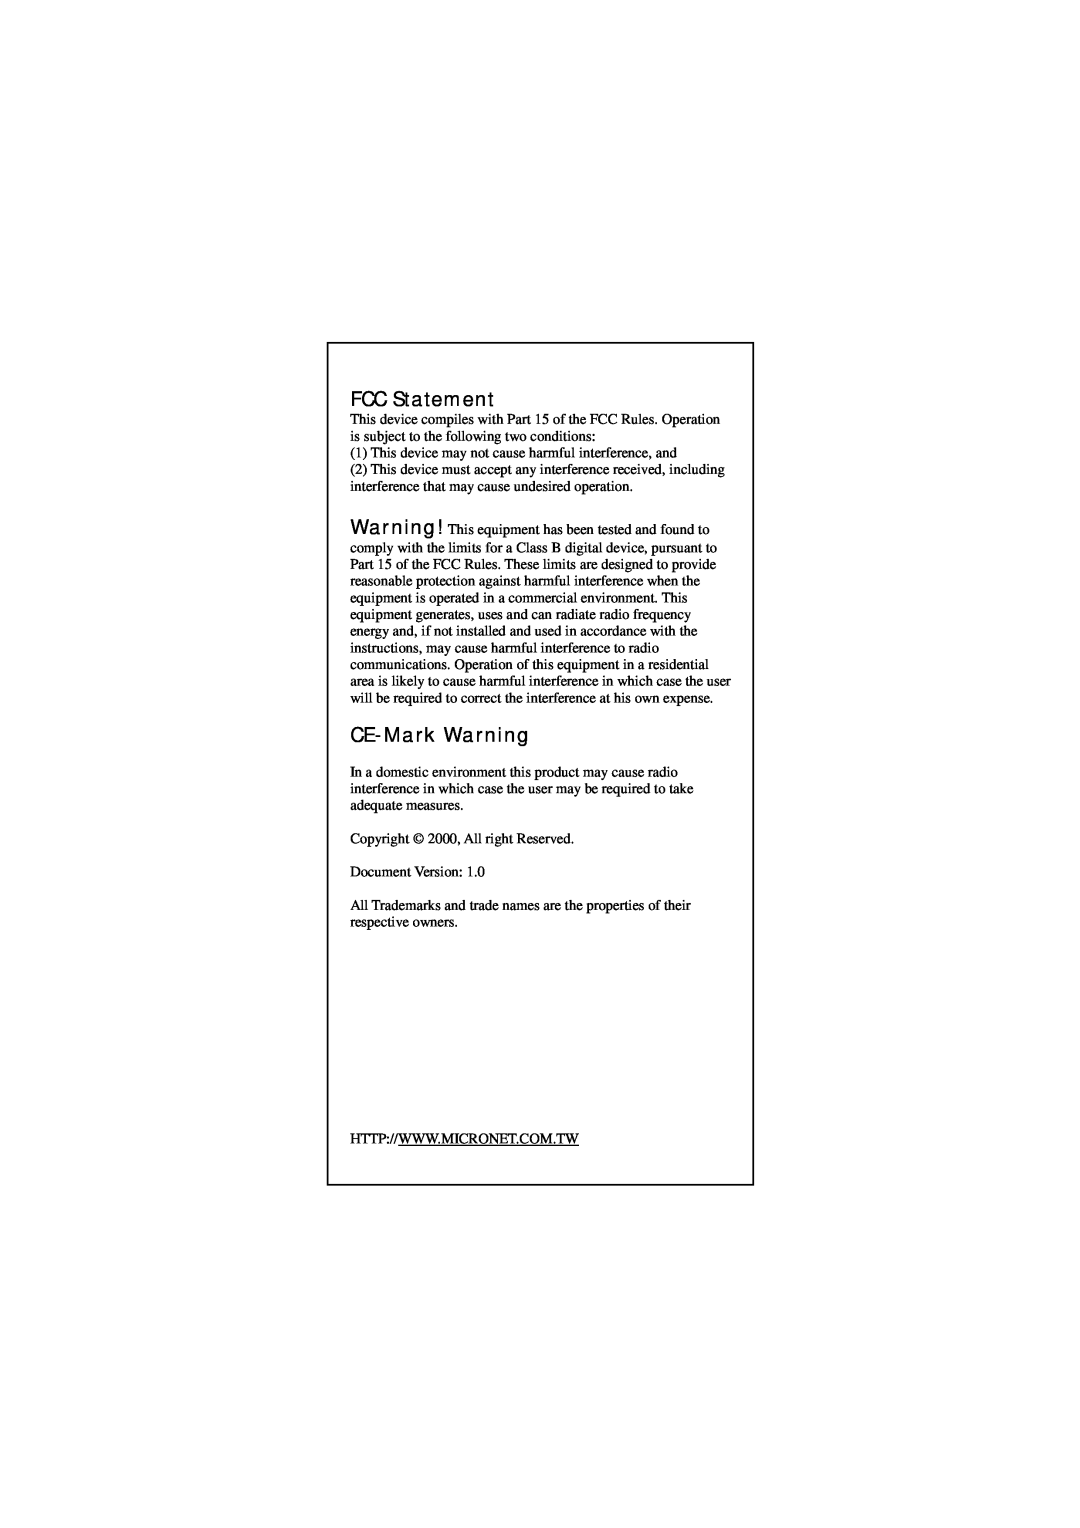 MicroNet Technology SP2515 SERIES manual FCC Statement, CE-Mark Warning 